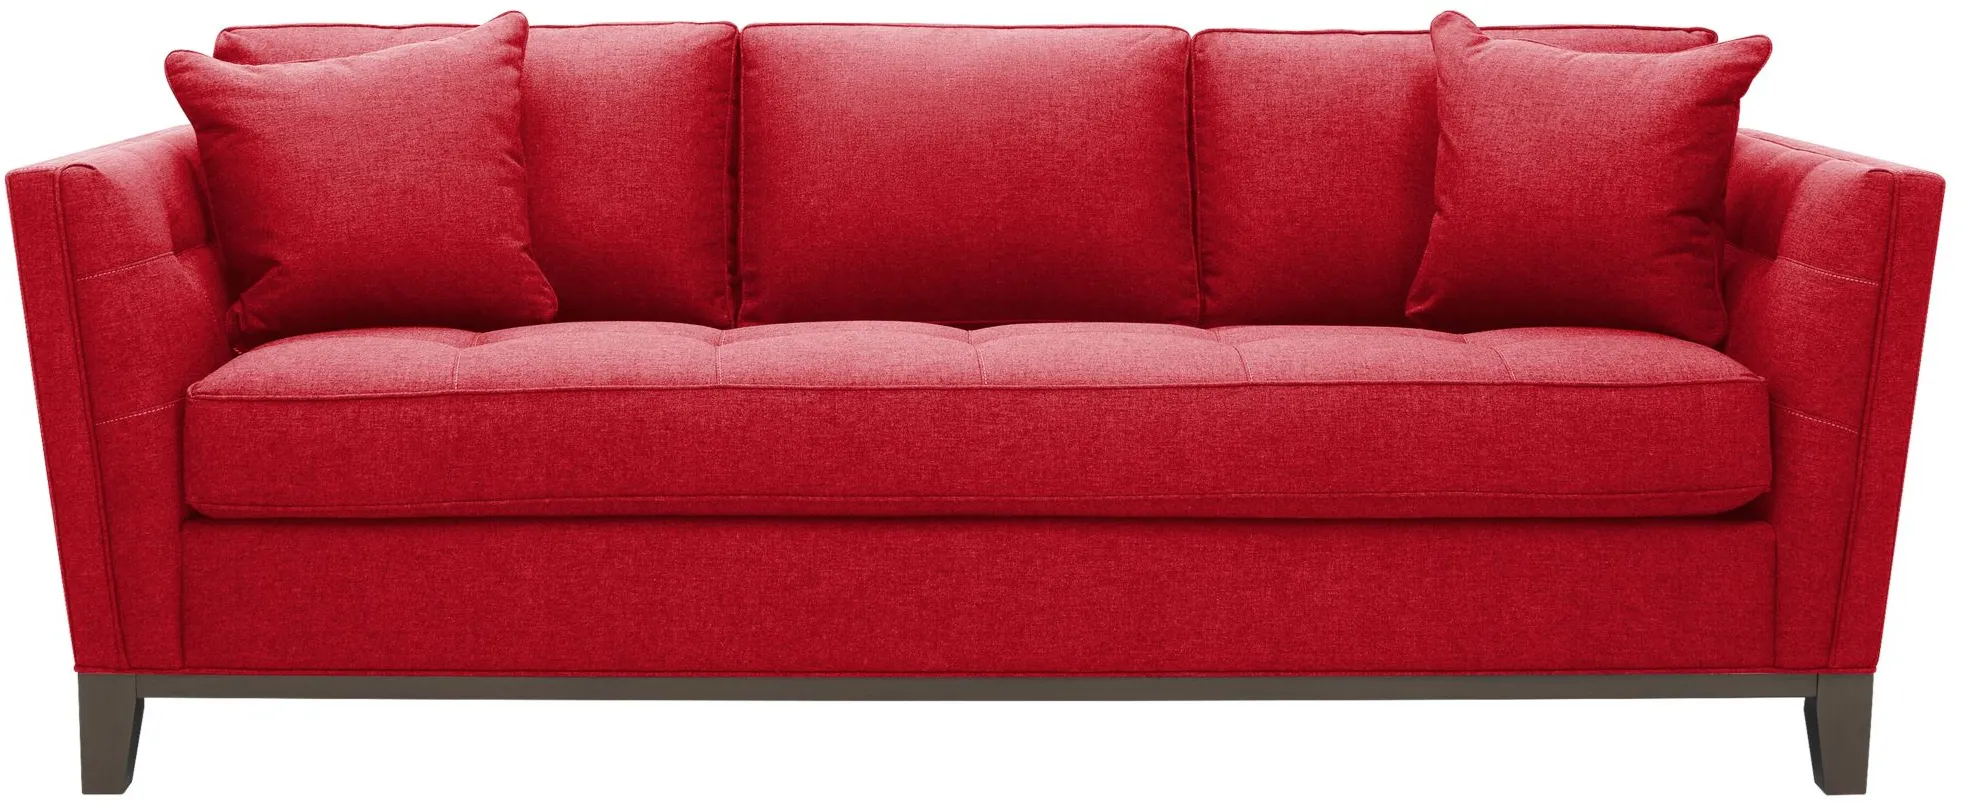 Macauley Sofa in Suede So Soft Cardinal by H.M. Richards